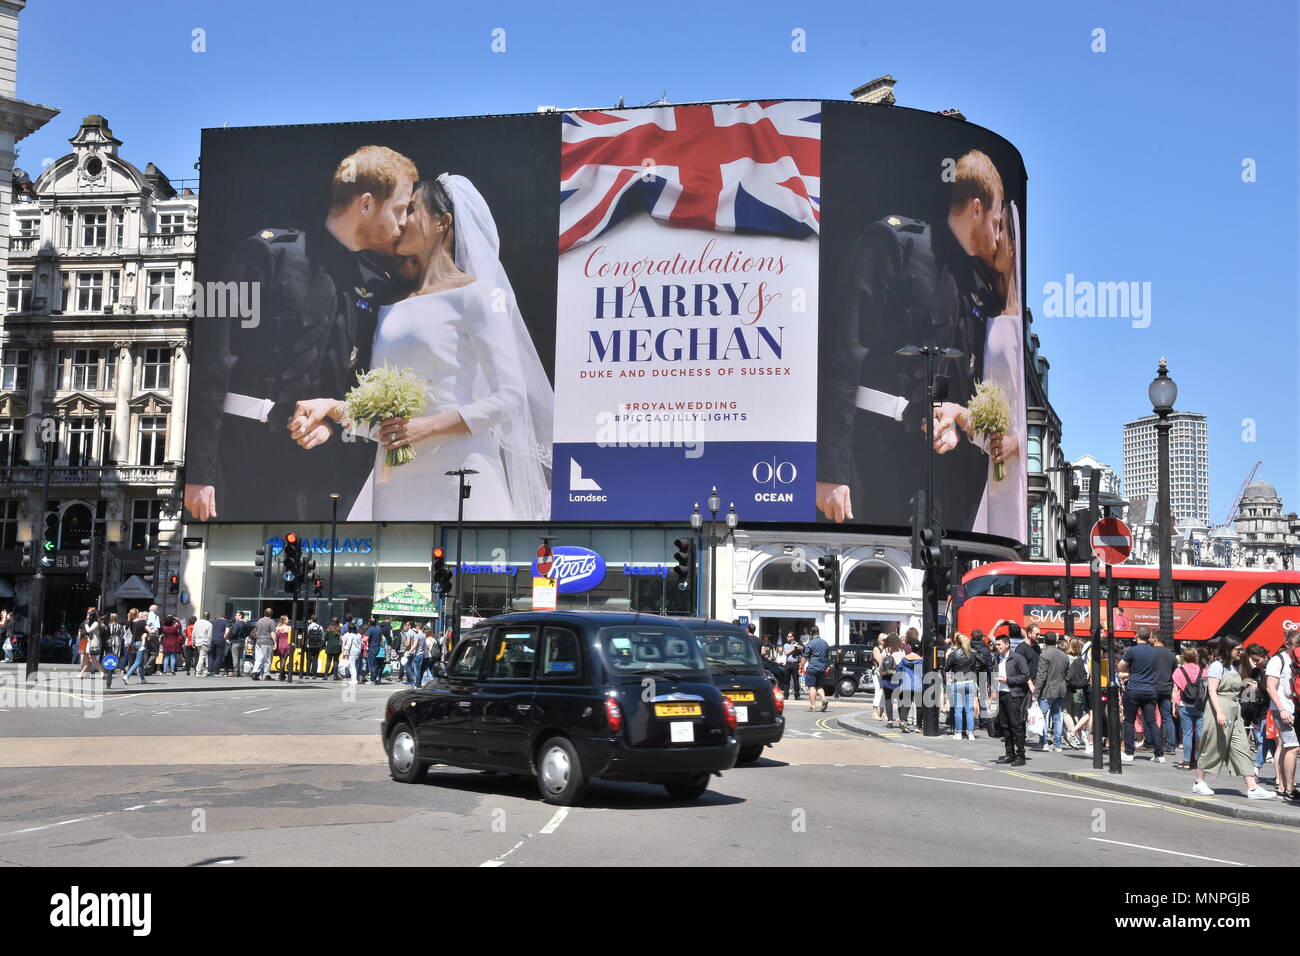 A picture of Prince Harry and Meghan Markle's Wedding in Windsor was displayed on the electronic billboard in Piccadilly Circus, Piccadilly, London. UK 19.05.2018 Credit: michael melia/Alamy Live News Stock Photo